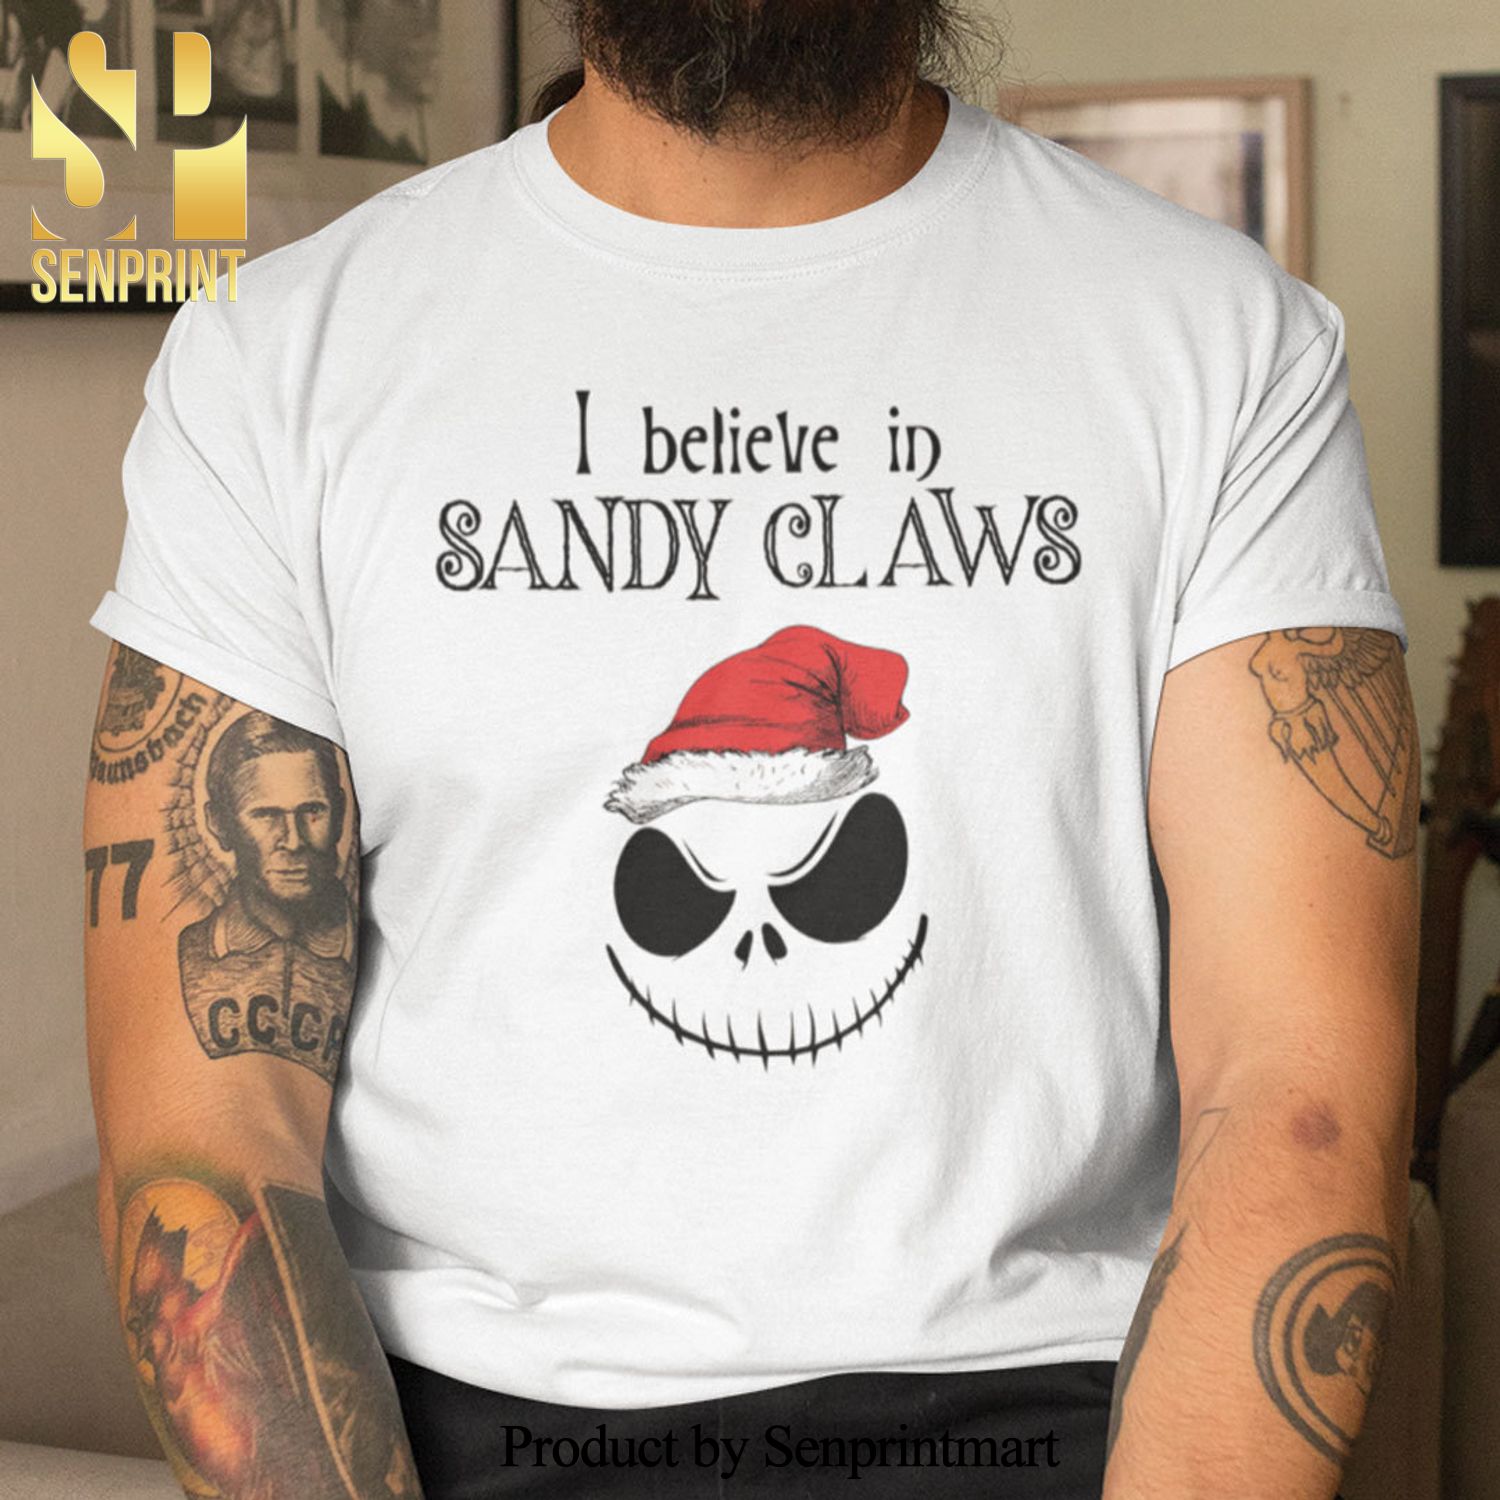 The Nightmare Christmas Gifts Shirts I Believe The Sandy Claws